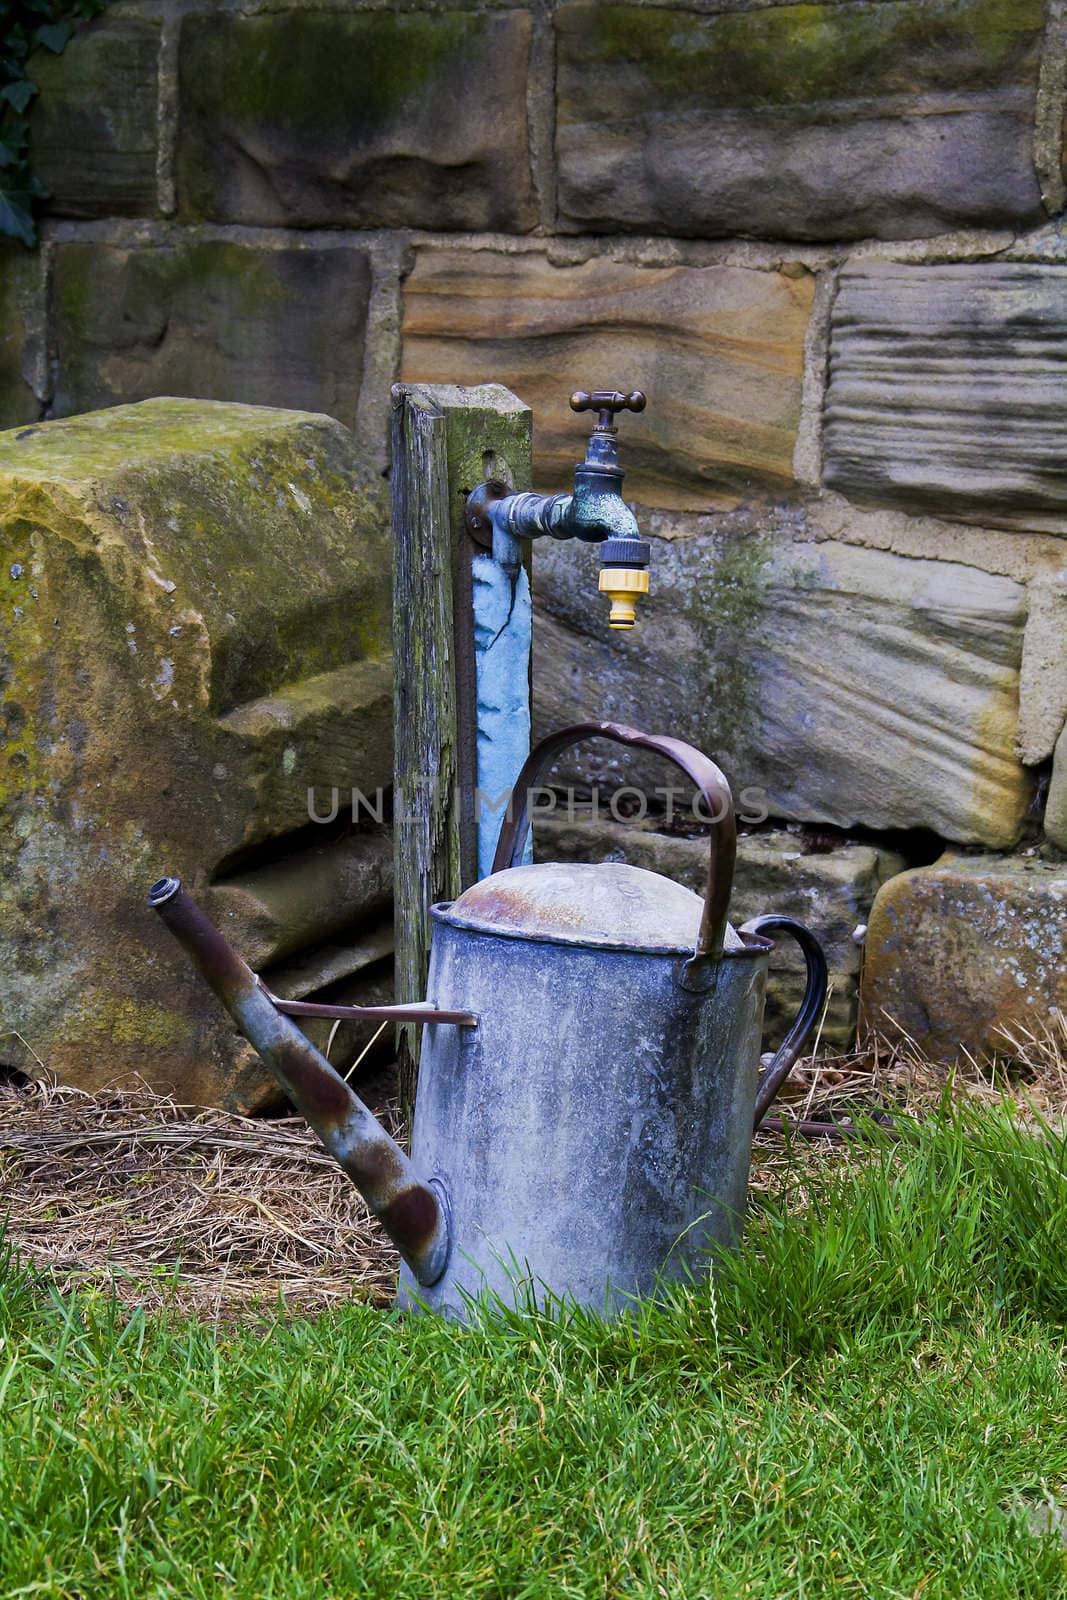 It looks as if it has seen better days this old and weathered watering can with its rust and textured patterns